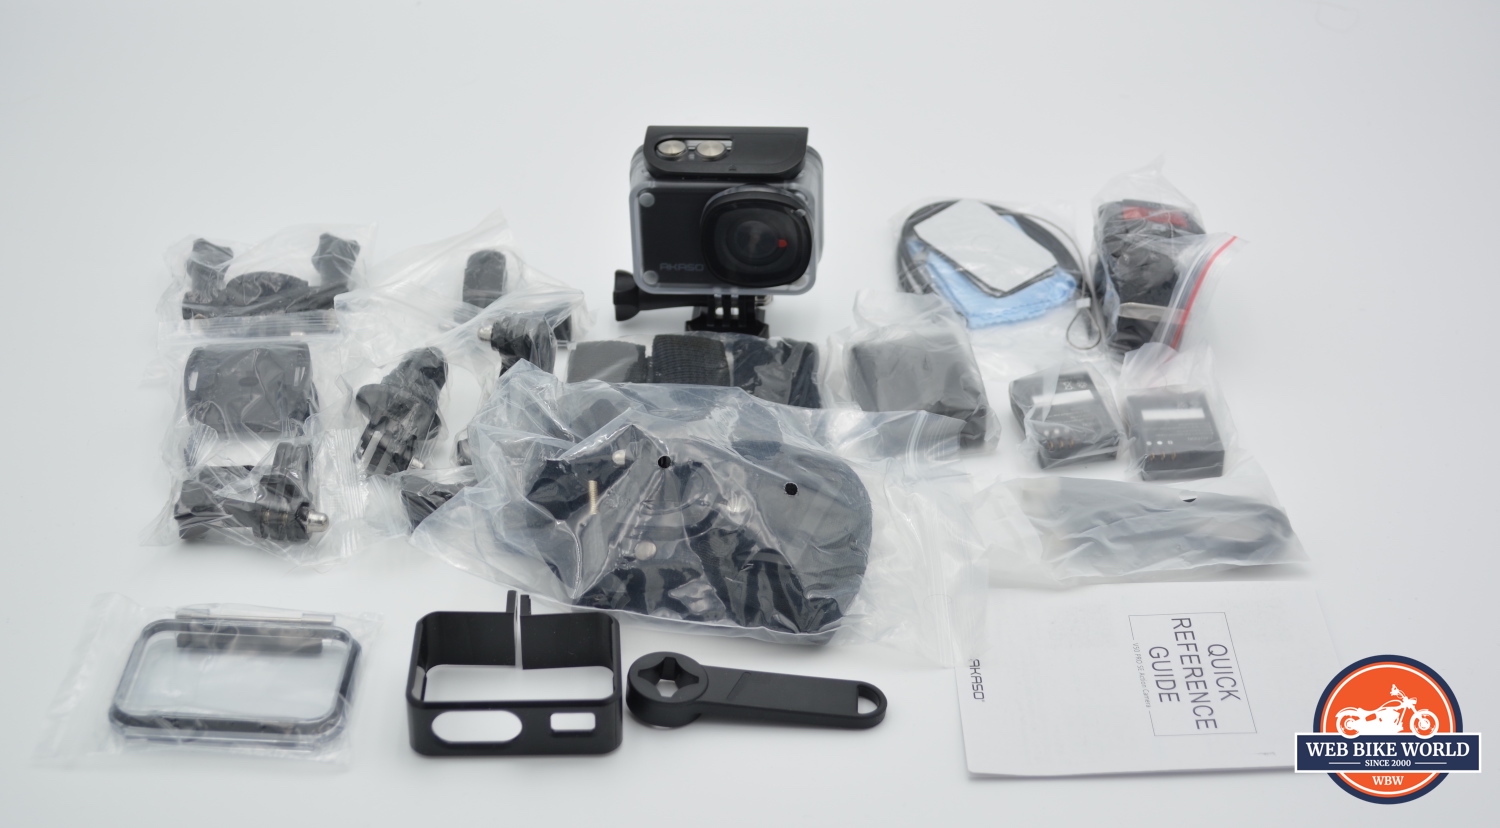 Akaso V50 Pro action camera review - The Gadgeteer